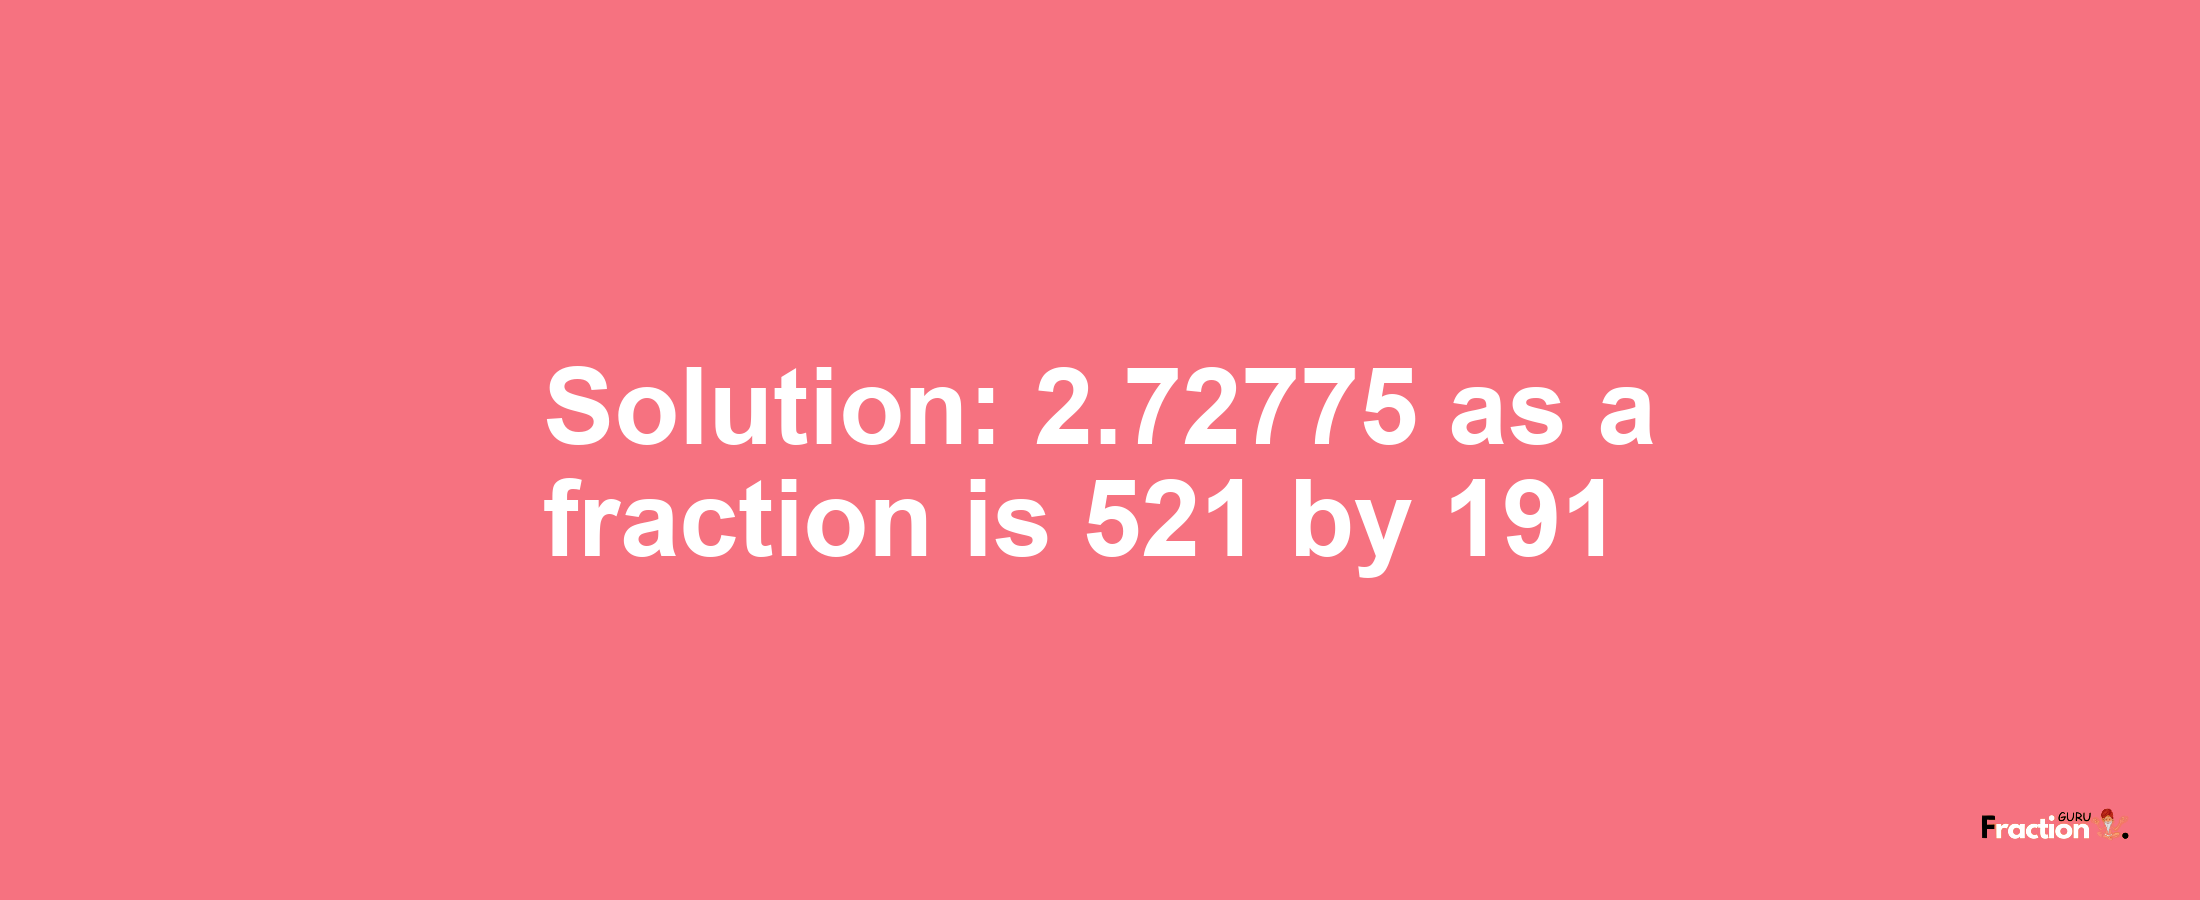 Solution:2.72775 as a fraction is 521/191